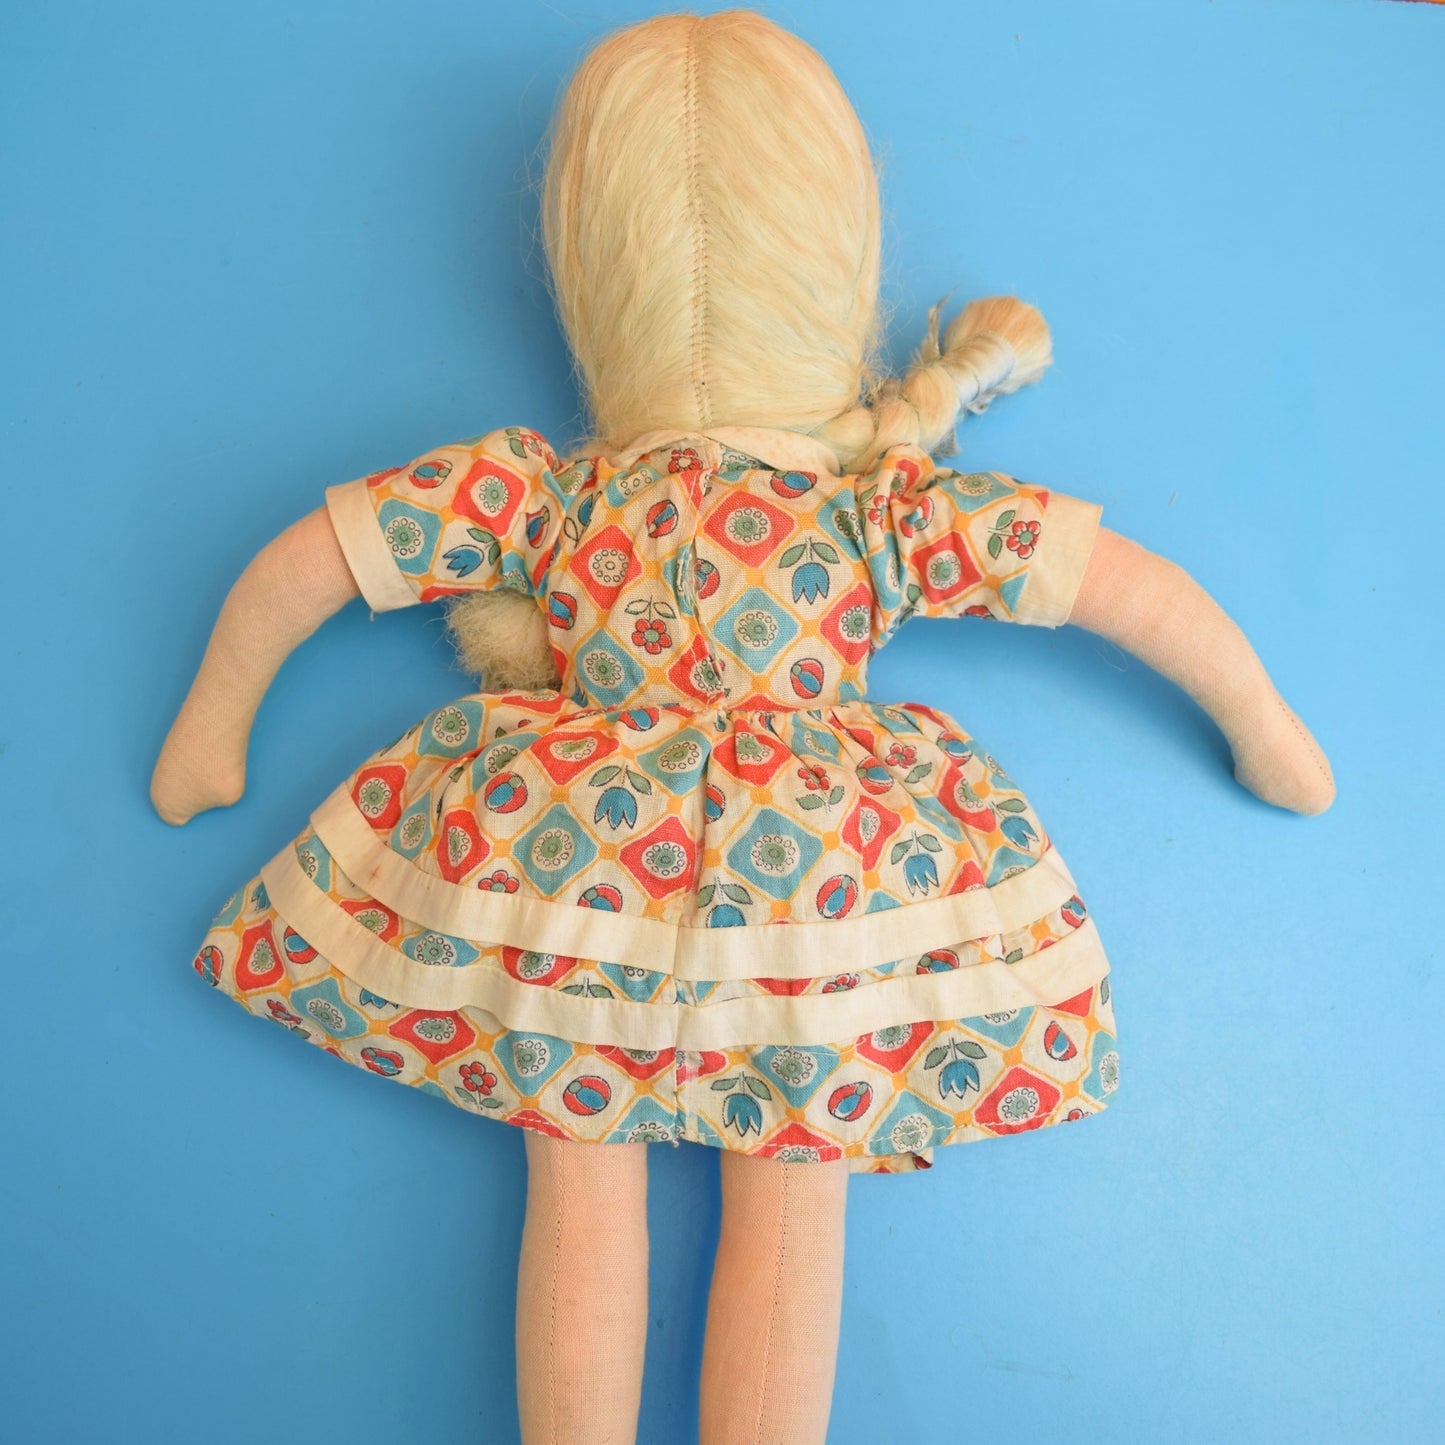 Vintage 1960s Kitsch Looby Lou Style Doll  - Plaits